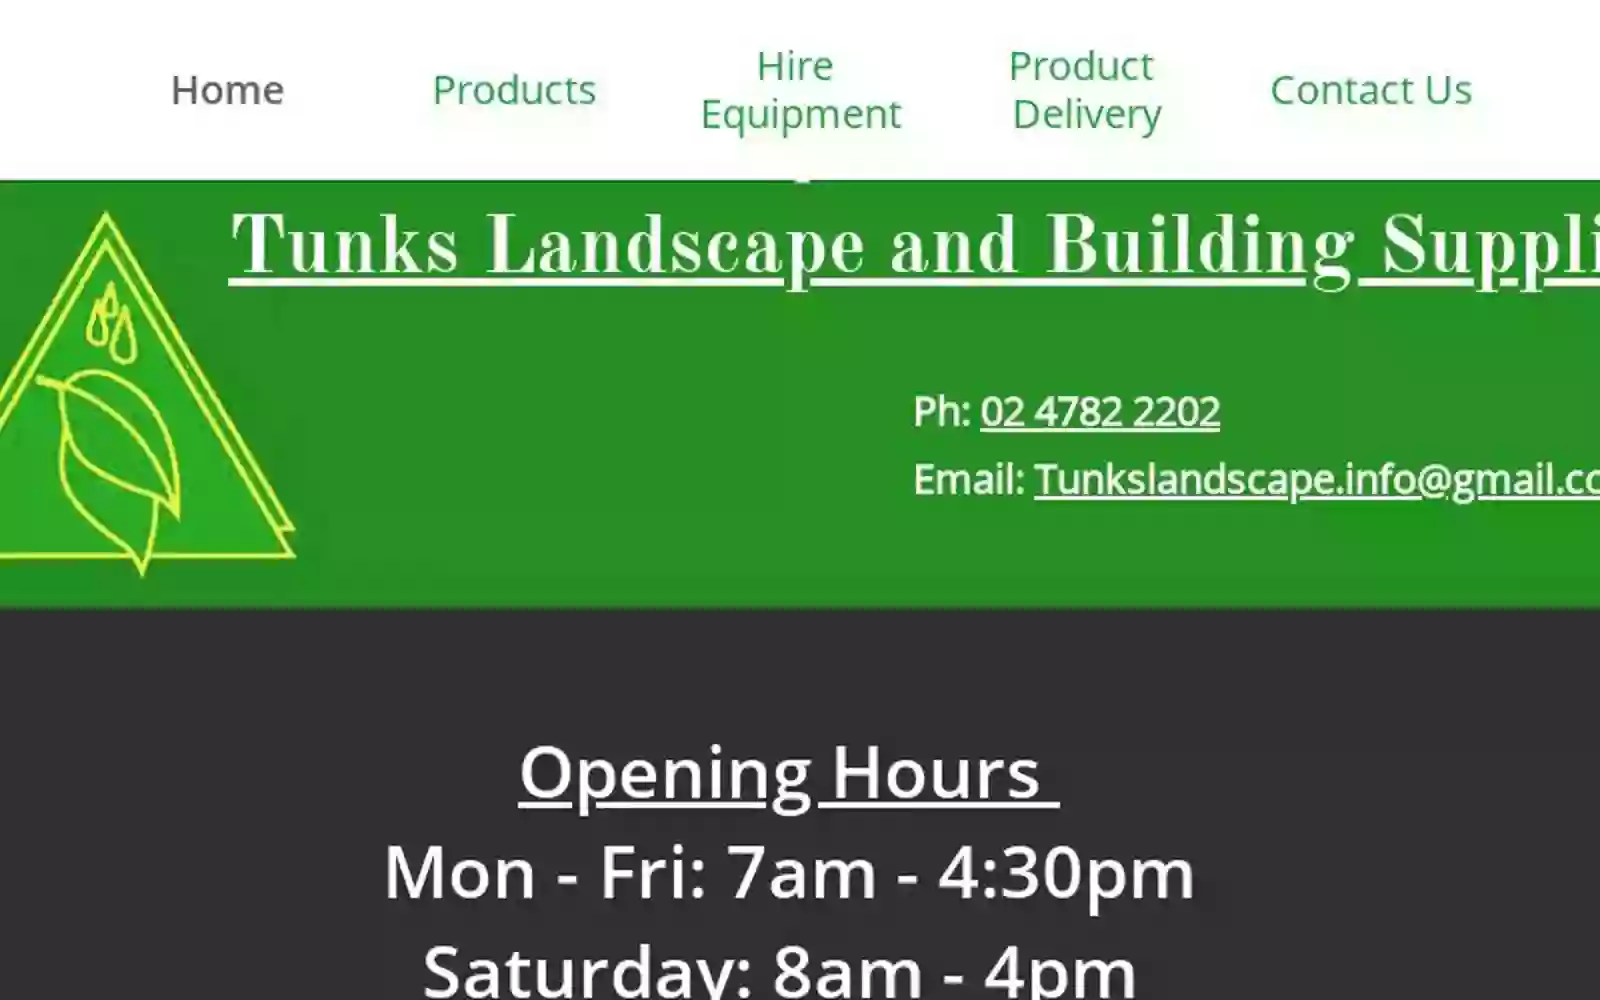 Tunks Landscape and Building Supplies